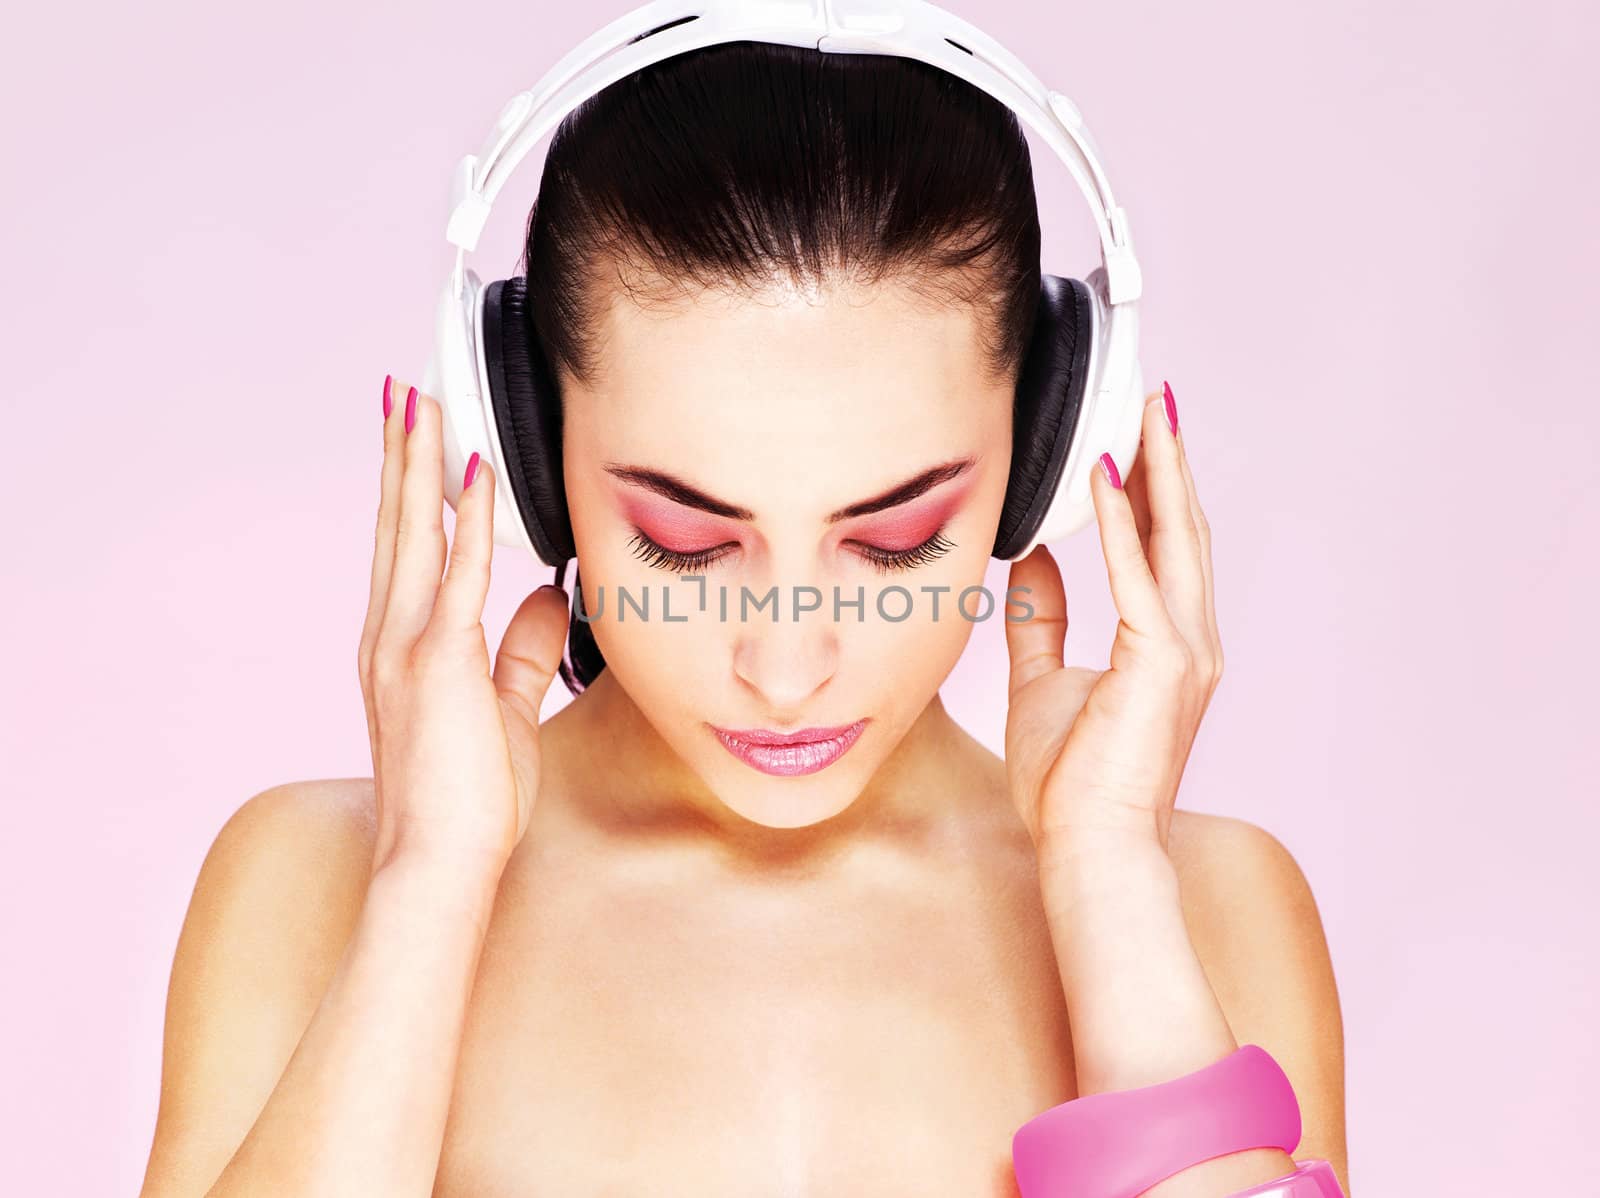 Pretty woman with headphones